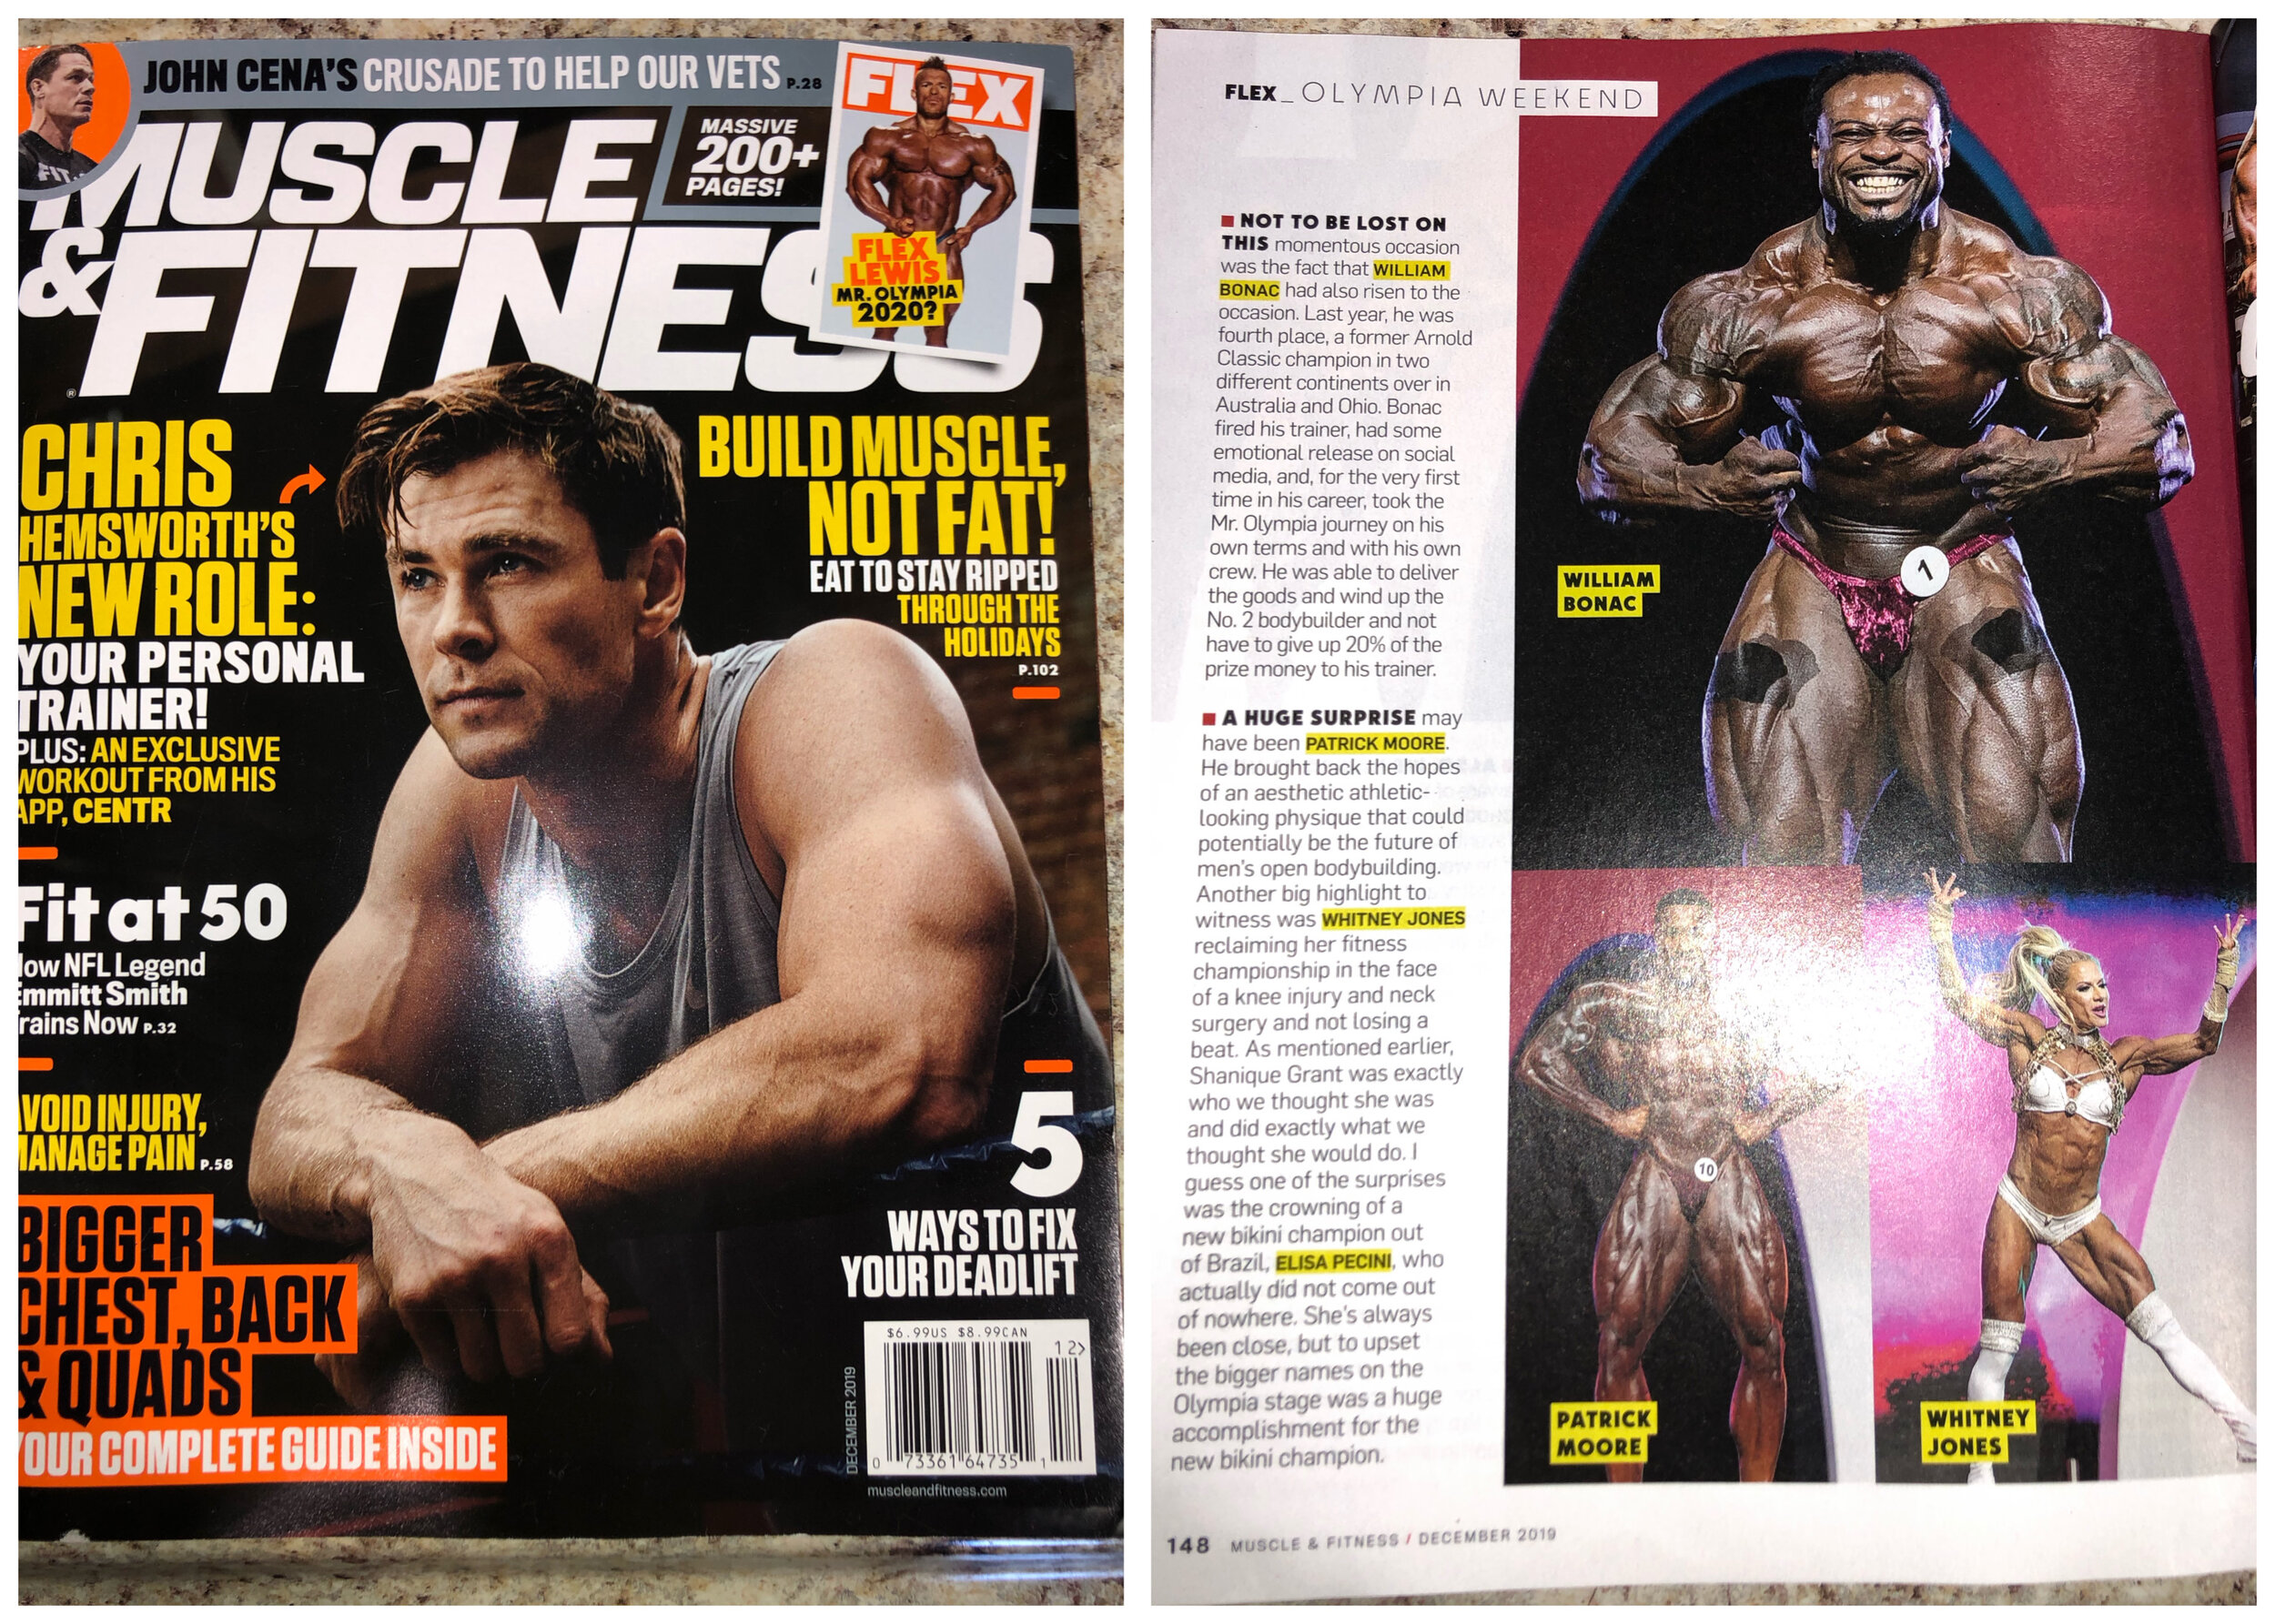 Muscle and Fitness / December 2019 